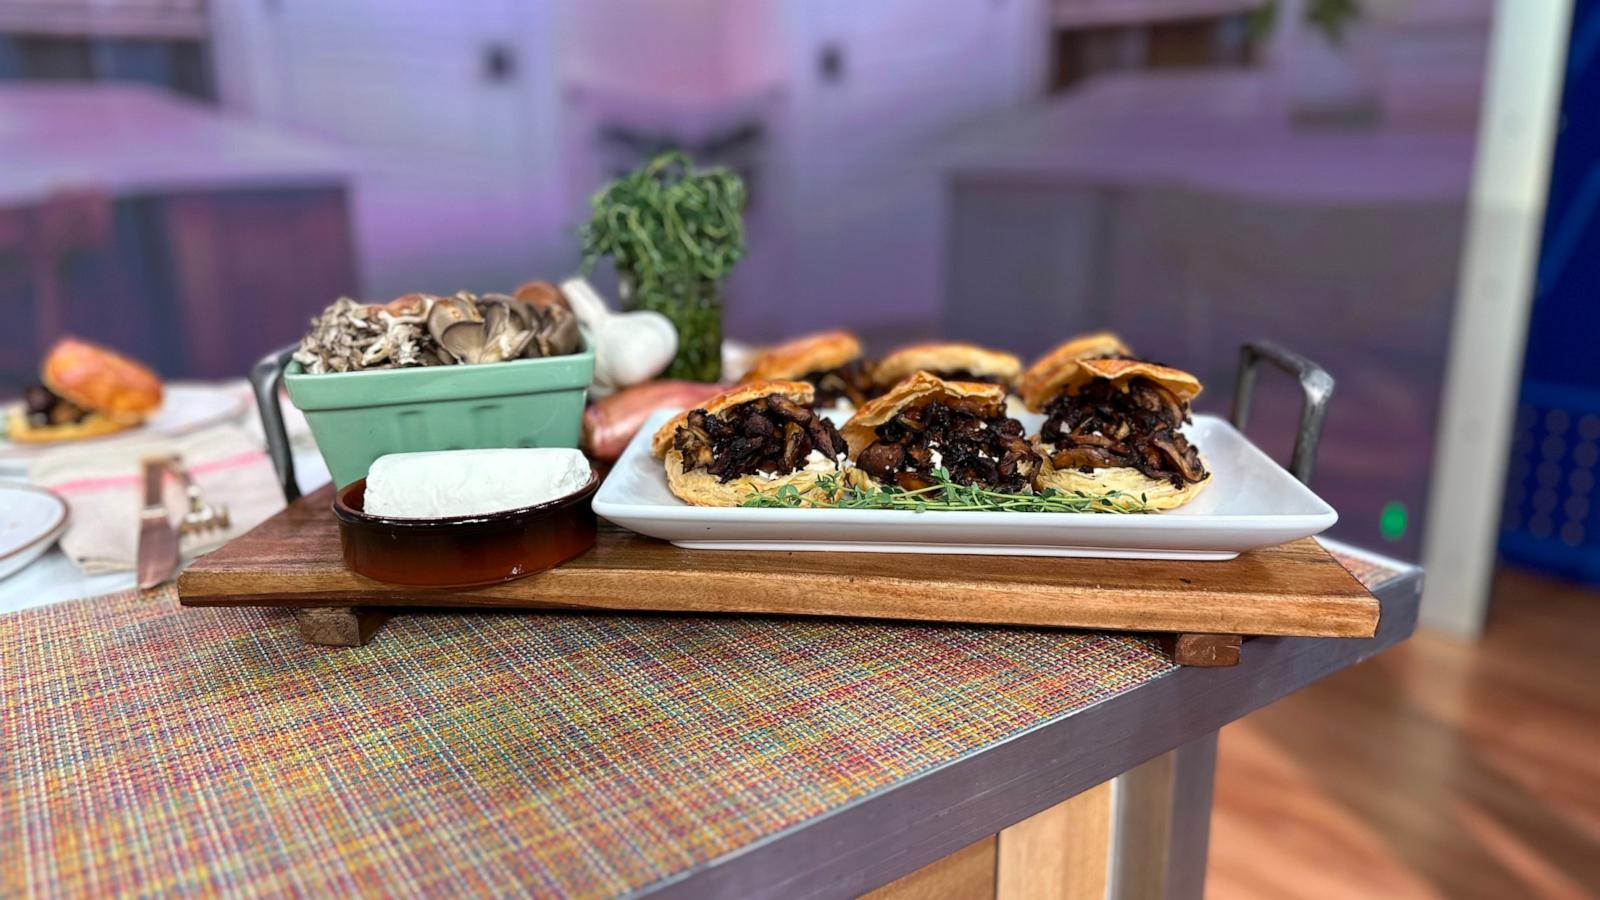 PHOTO: Chef Joey Fortunato of Scarlet in New York City joins us to make his mushroom and goat cheese tart and shares a delicious mocktail recipe to accompany it!